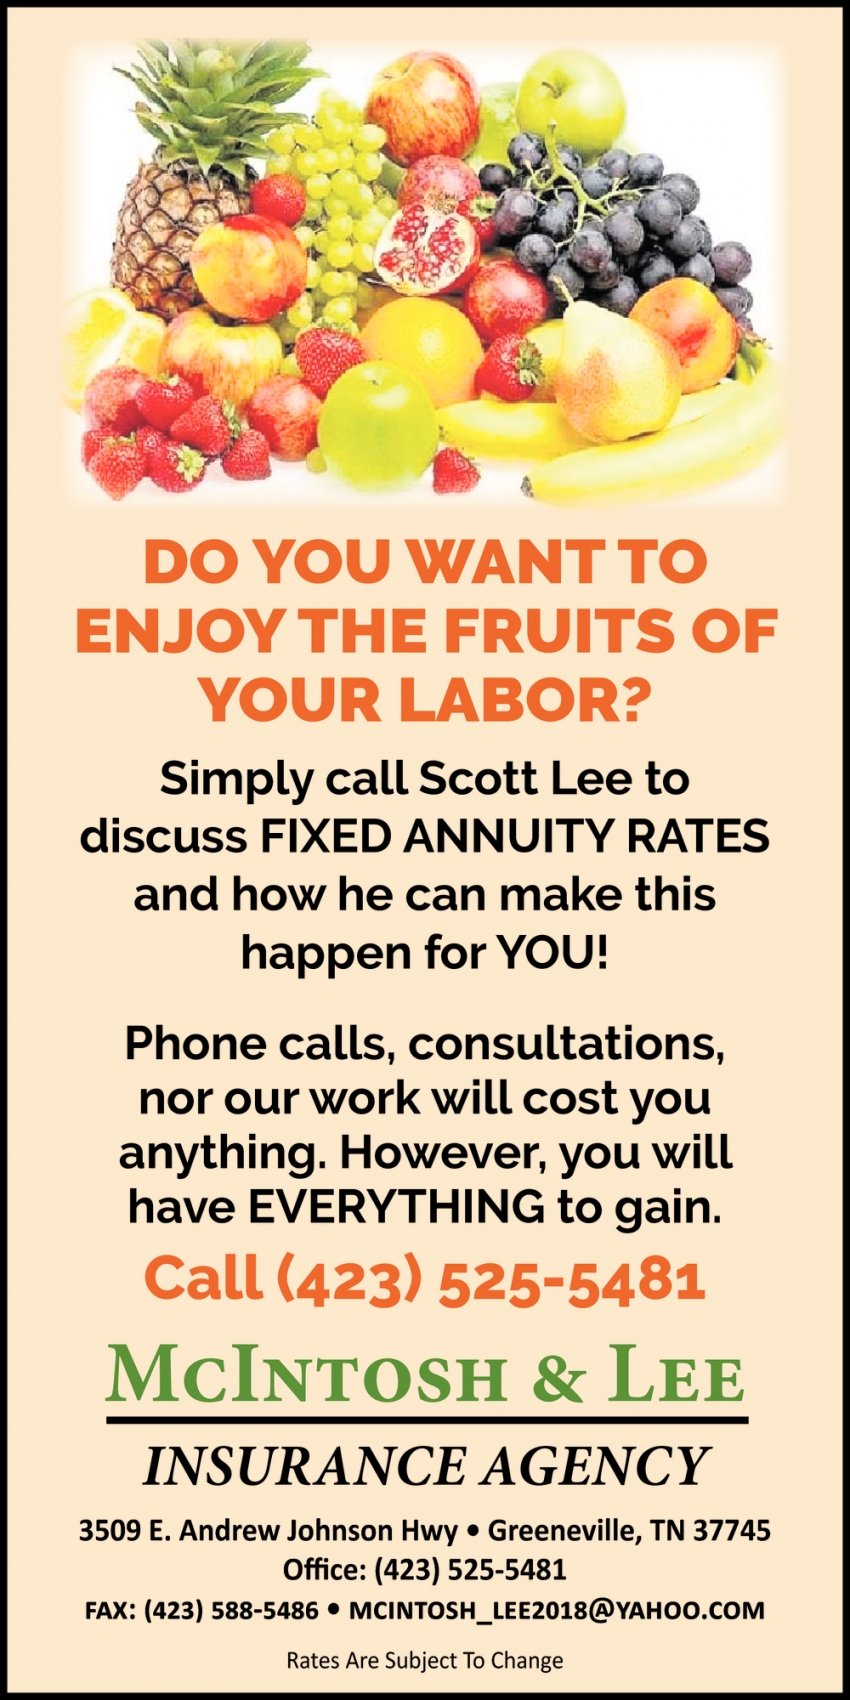 Do You Want to Enjoy the Fruits of Your Labor?